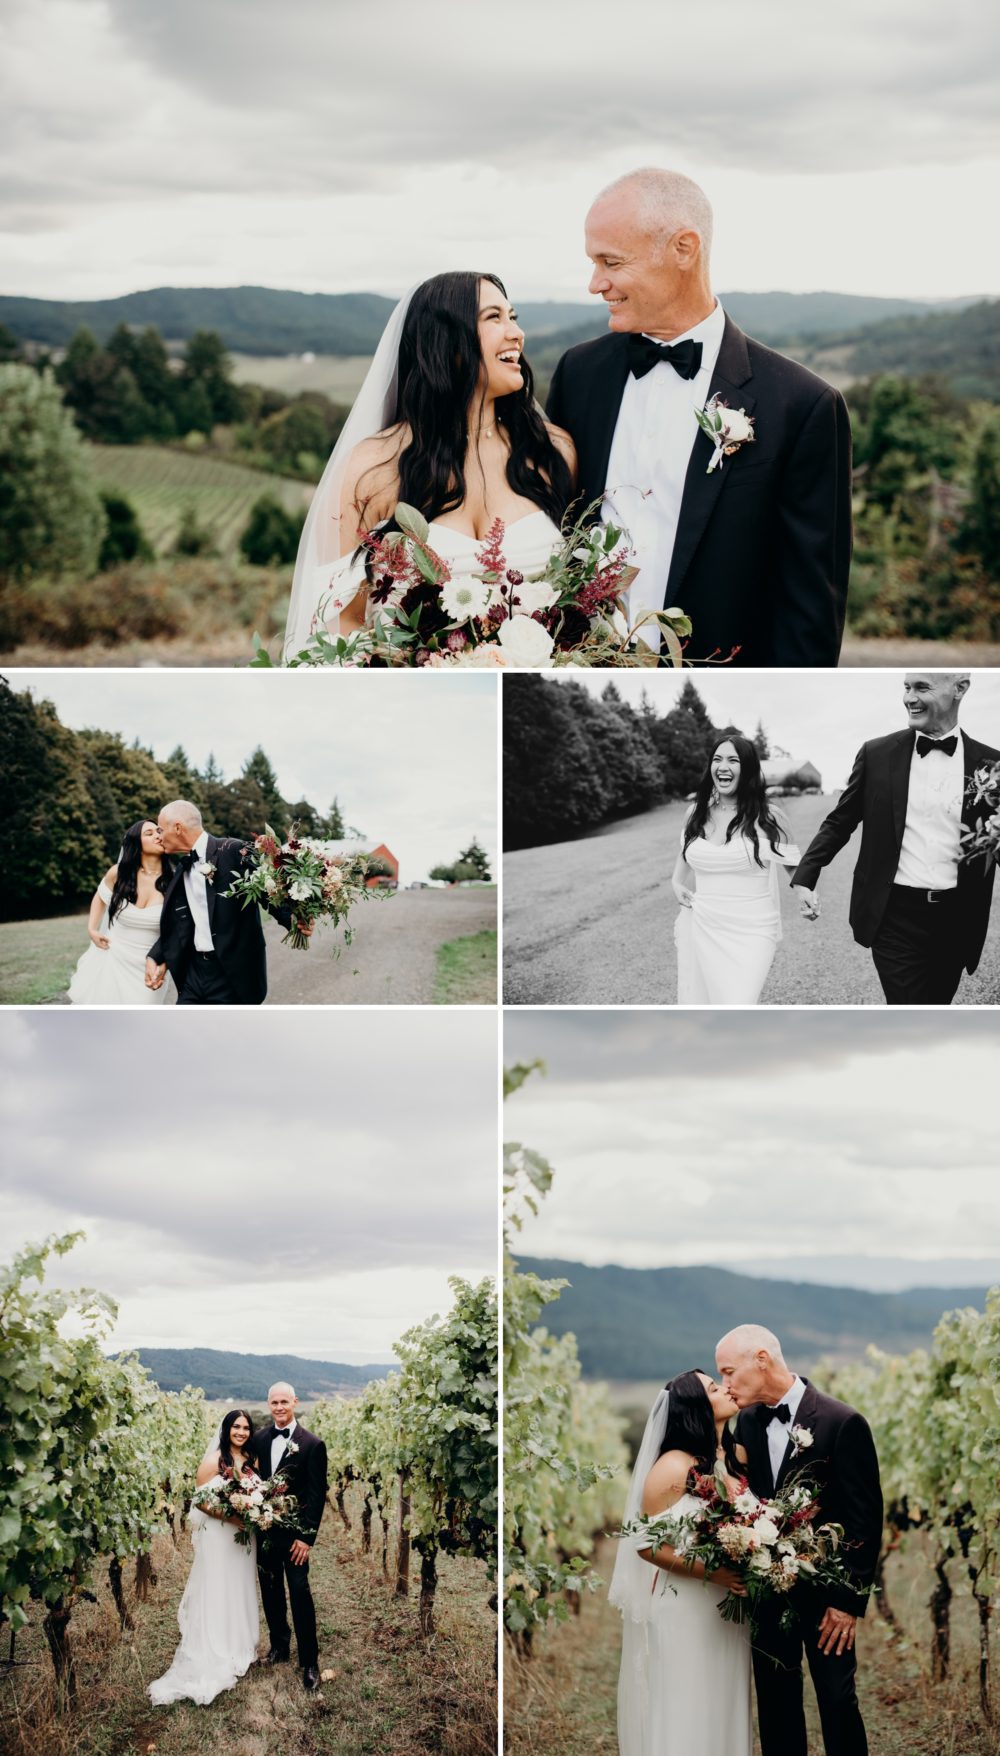 Bridal portraits at Youngberg Hill in McMinnville, Oregon  - by Portland Wedding Photographer, Briana Morrison